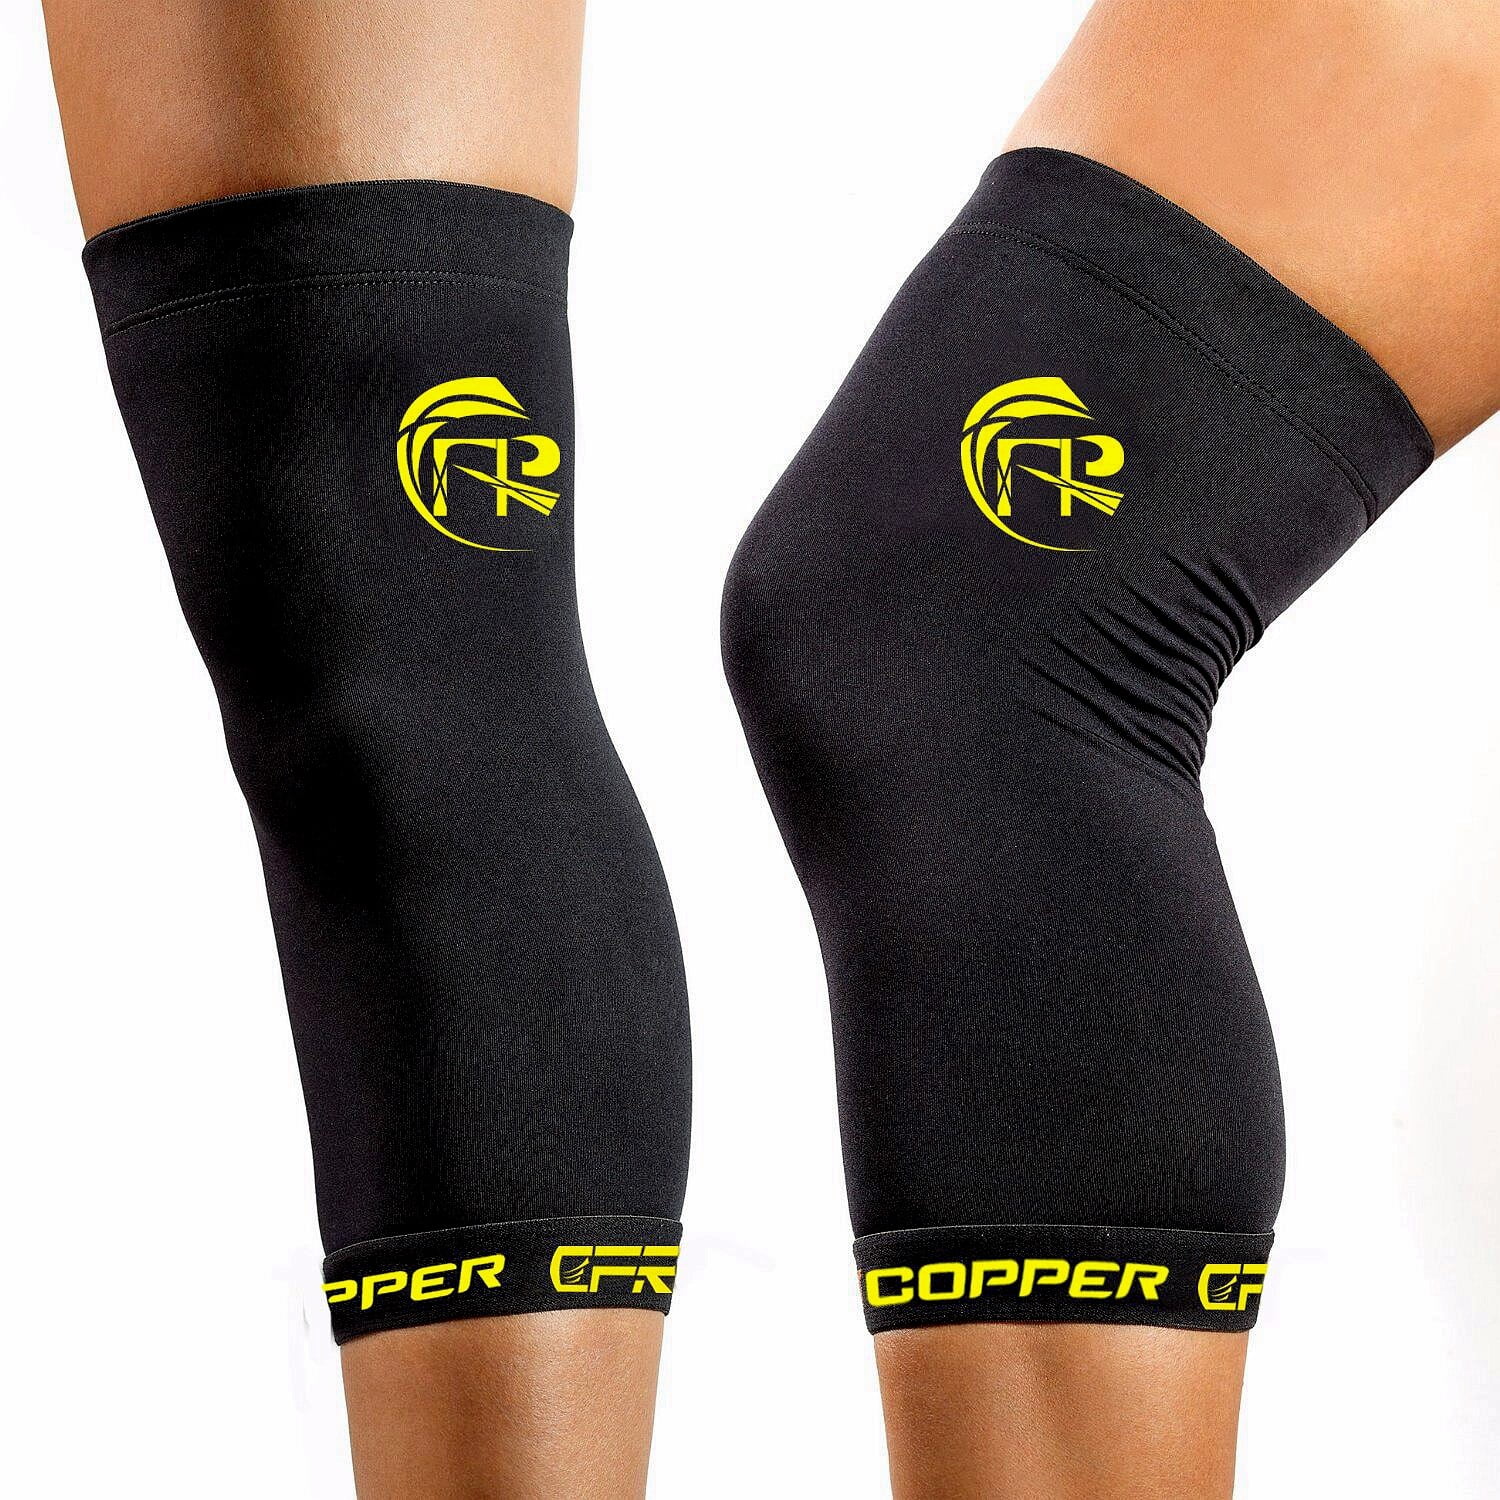 Copper Compression Knee Support Leg Thigh Sleeve Brace Sports Gym For Men Women 